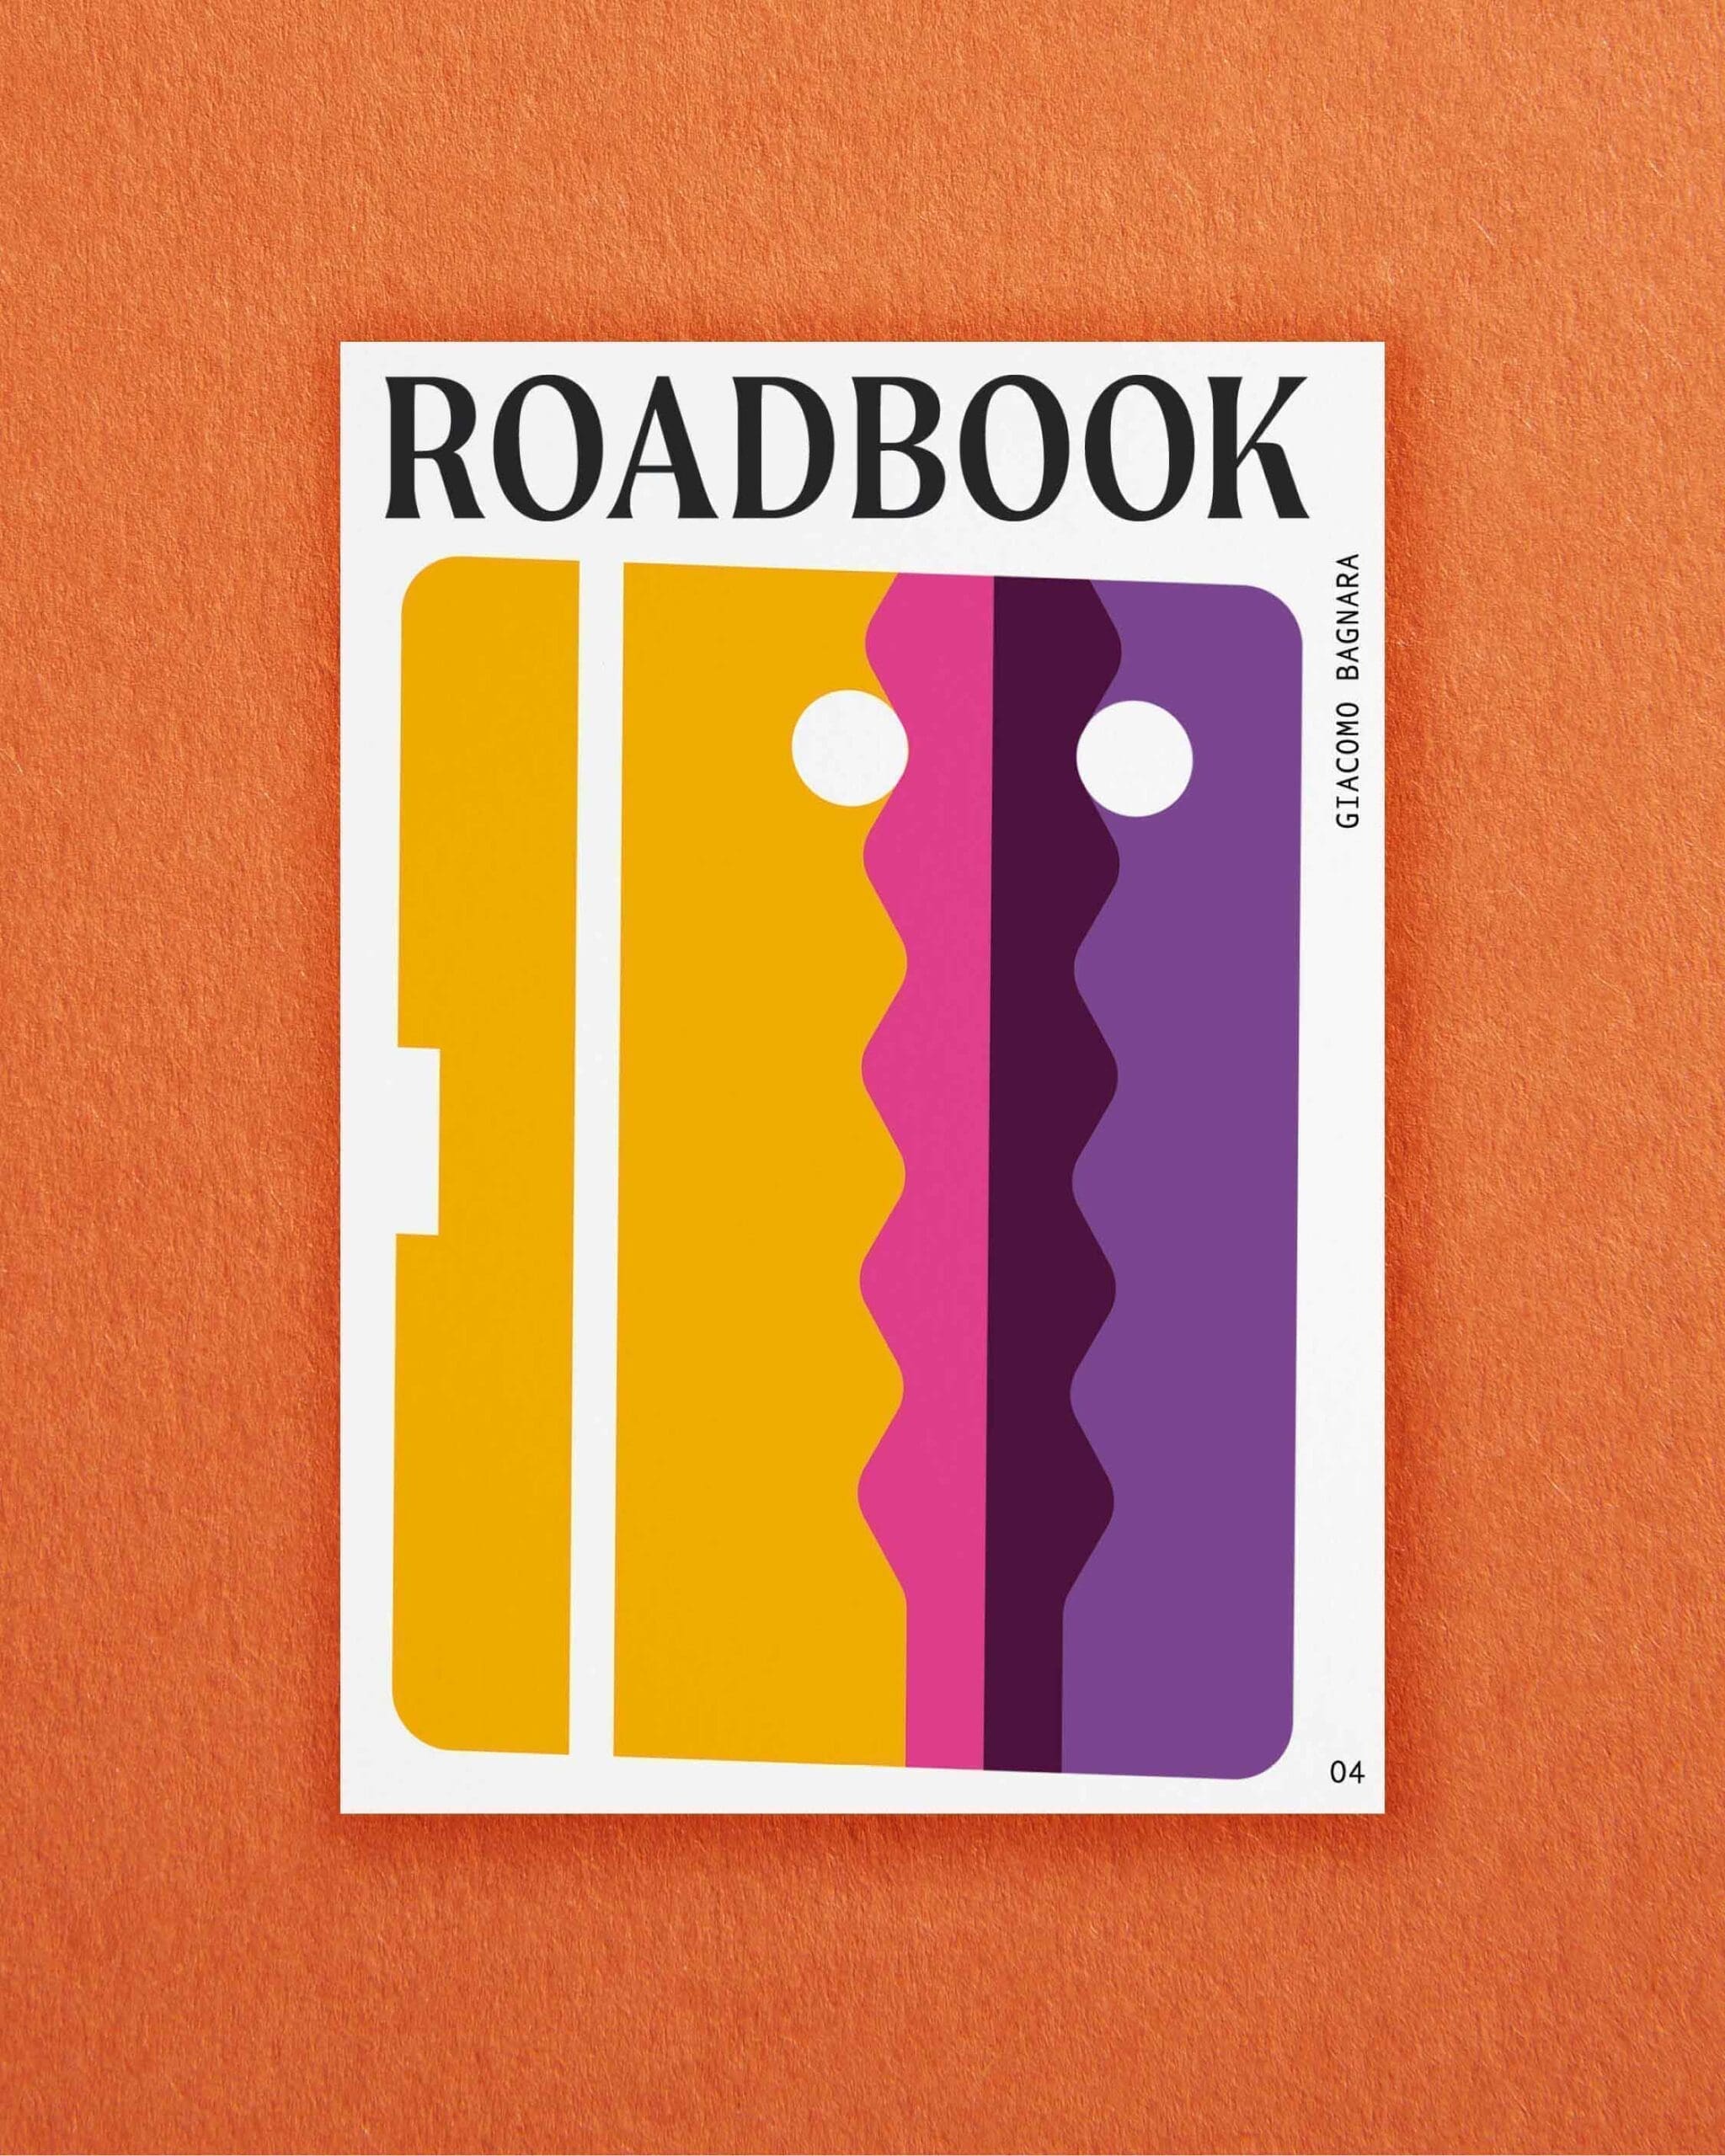 Postcards from ROADBOOK | a graphic beach scene in orange, pink and purple